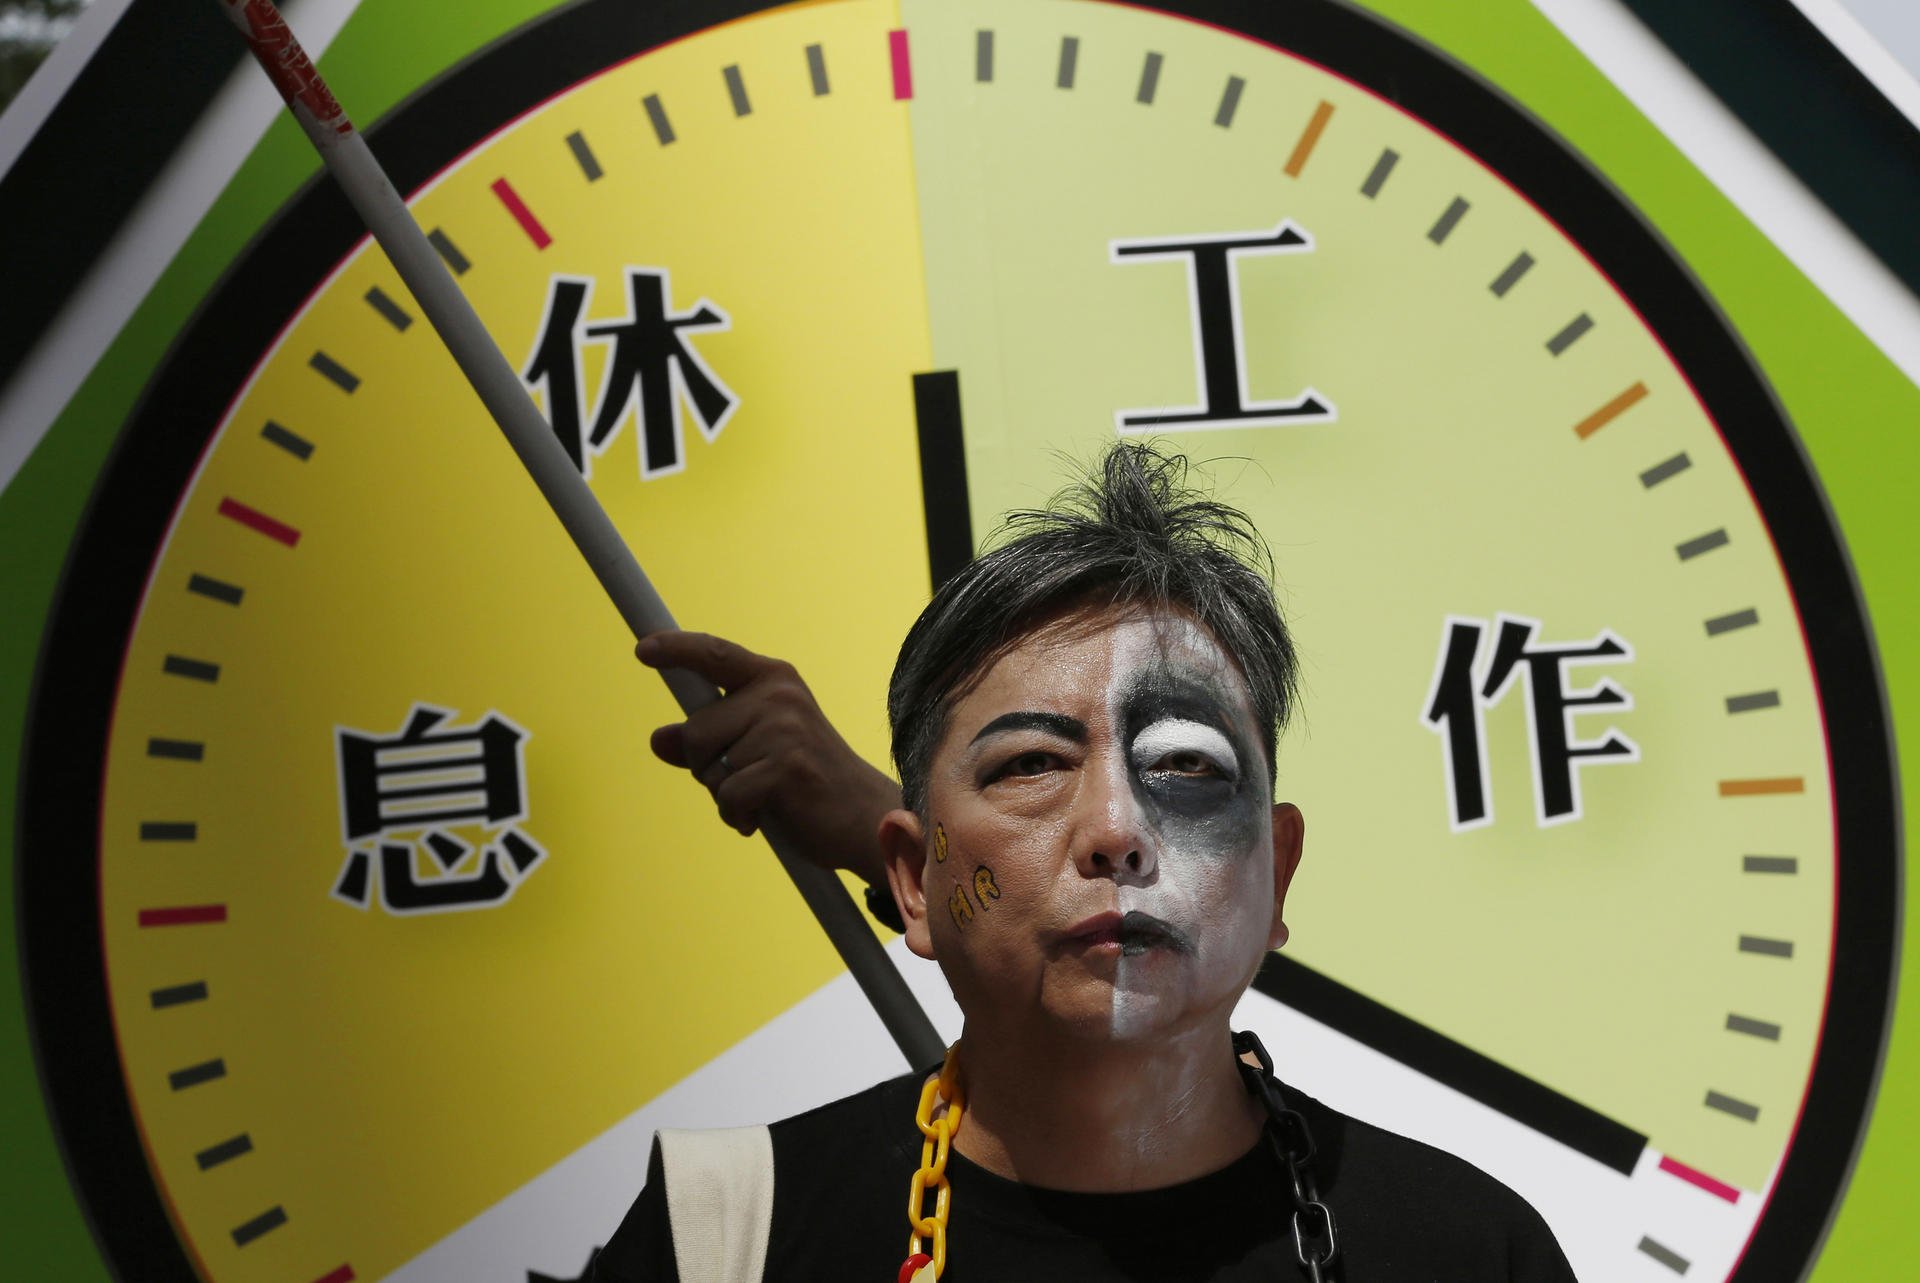 A protester at a rally for workers' rights seeks to ensure standard working hours in HK.Photo: AP